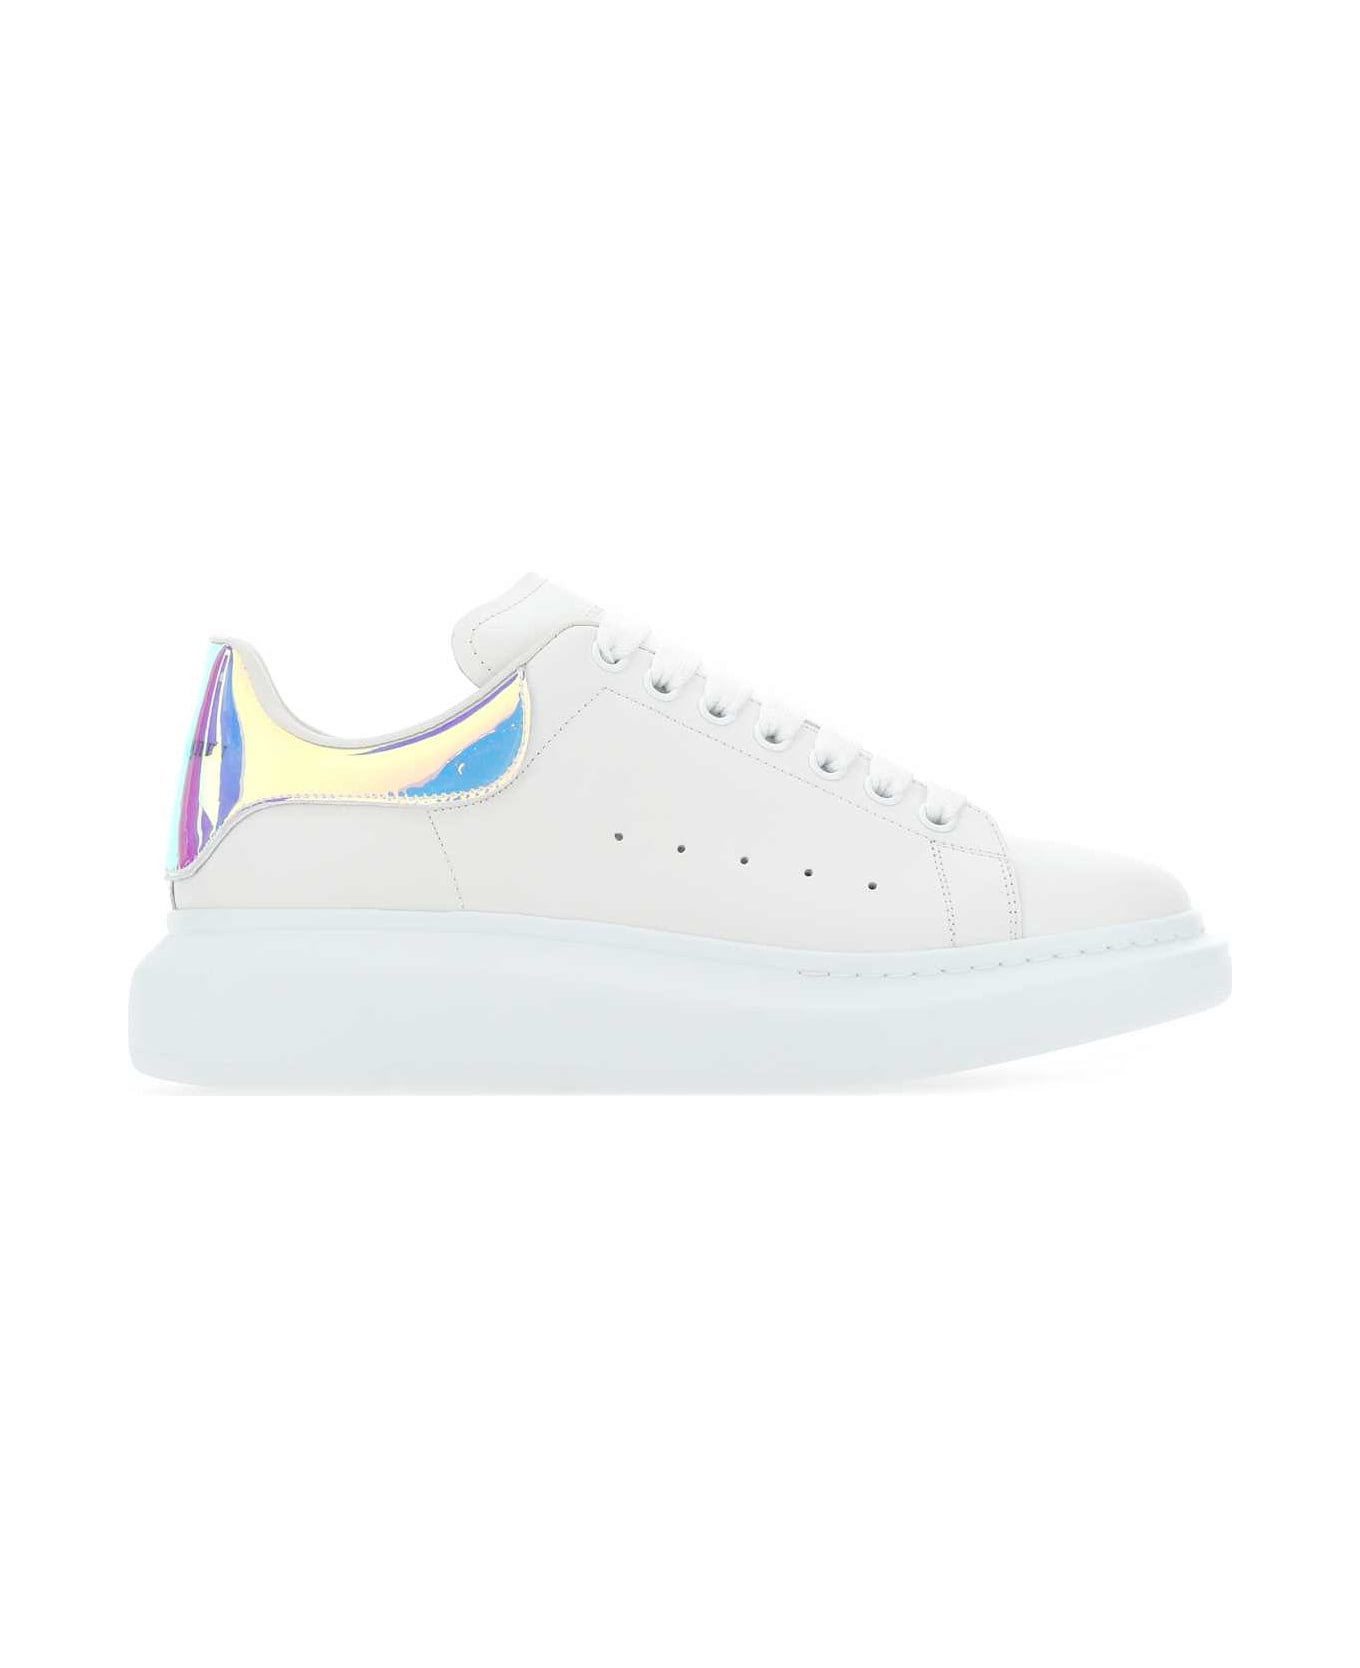 Alexander McQueen White Leather Sneakers With Oleographic Pvc Heel - 9375